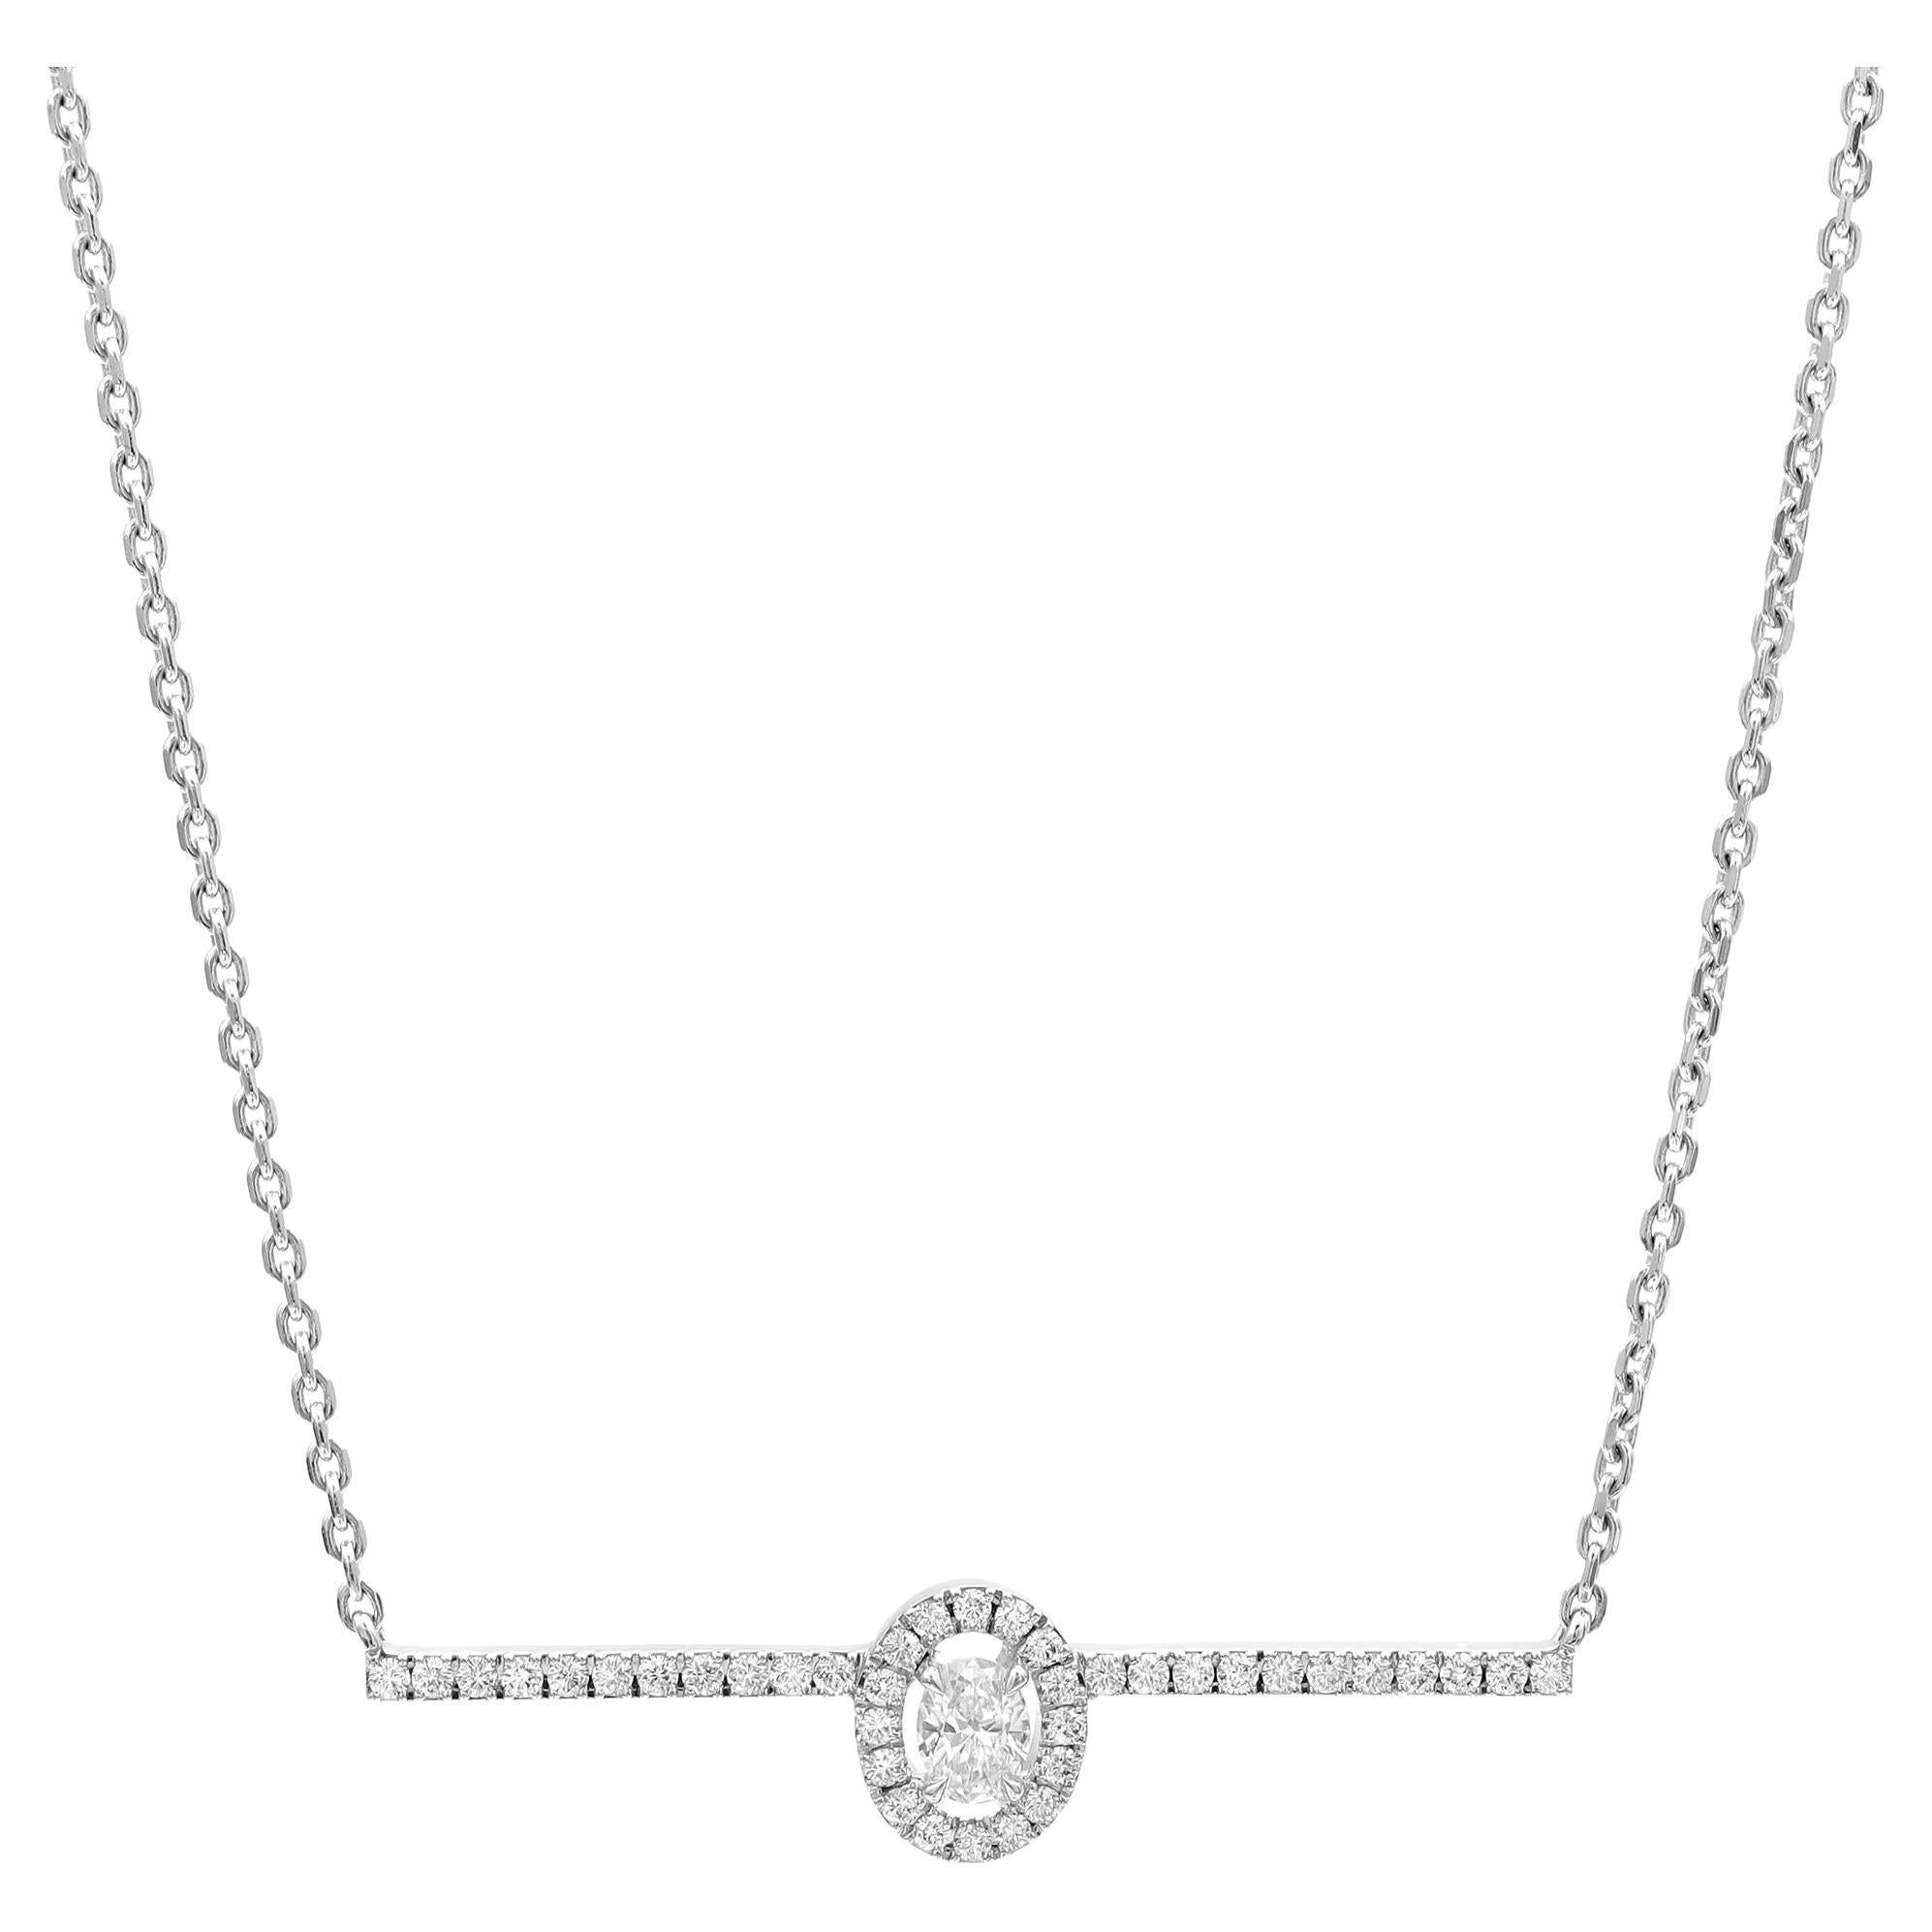 Messika 0.36Cttw Glam'Azone Diamond Chain Necklace 18K White Gold 18.5 Inches  en vente